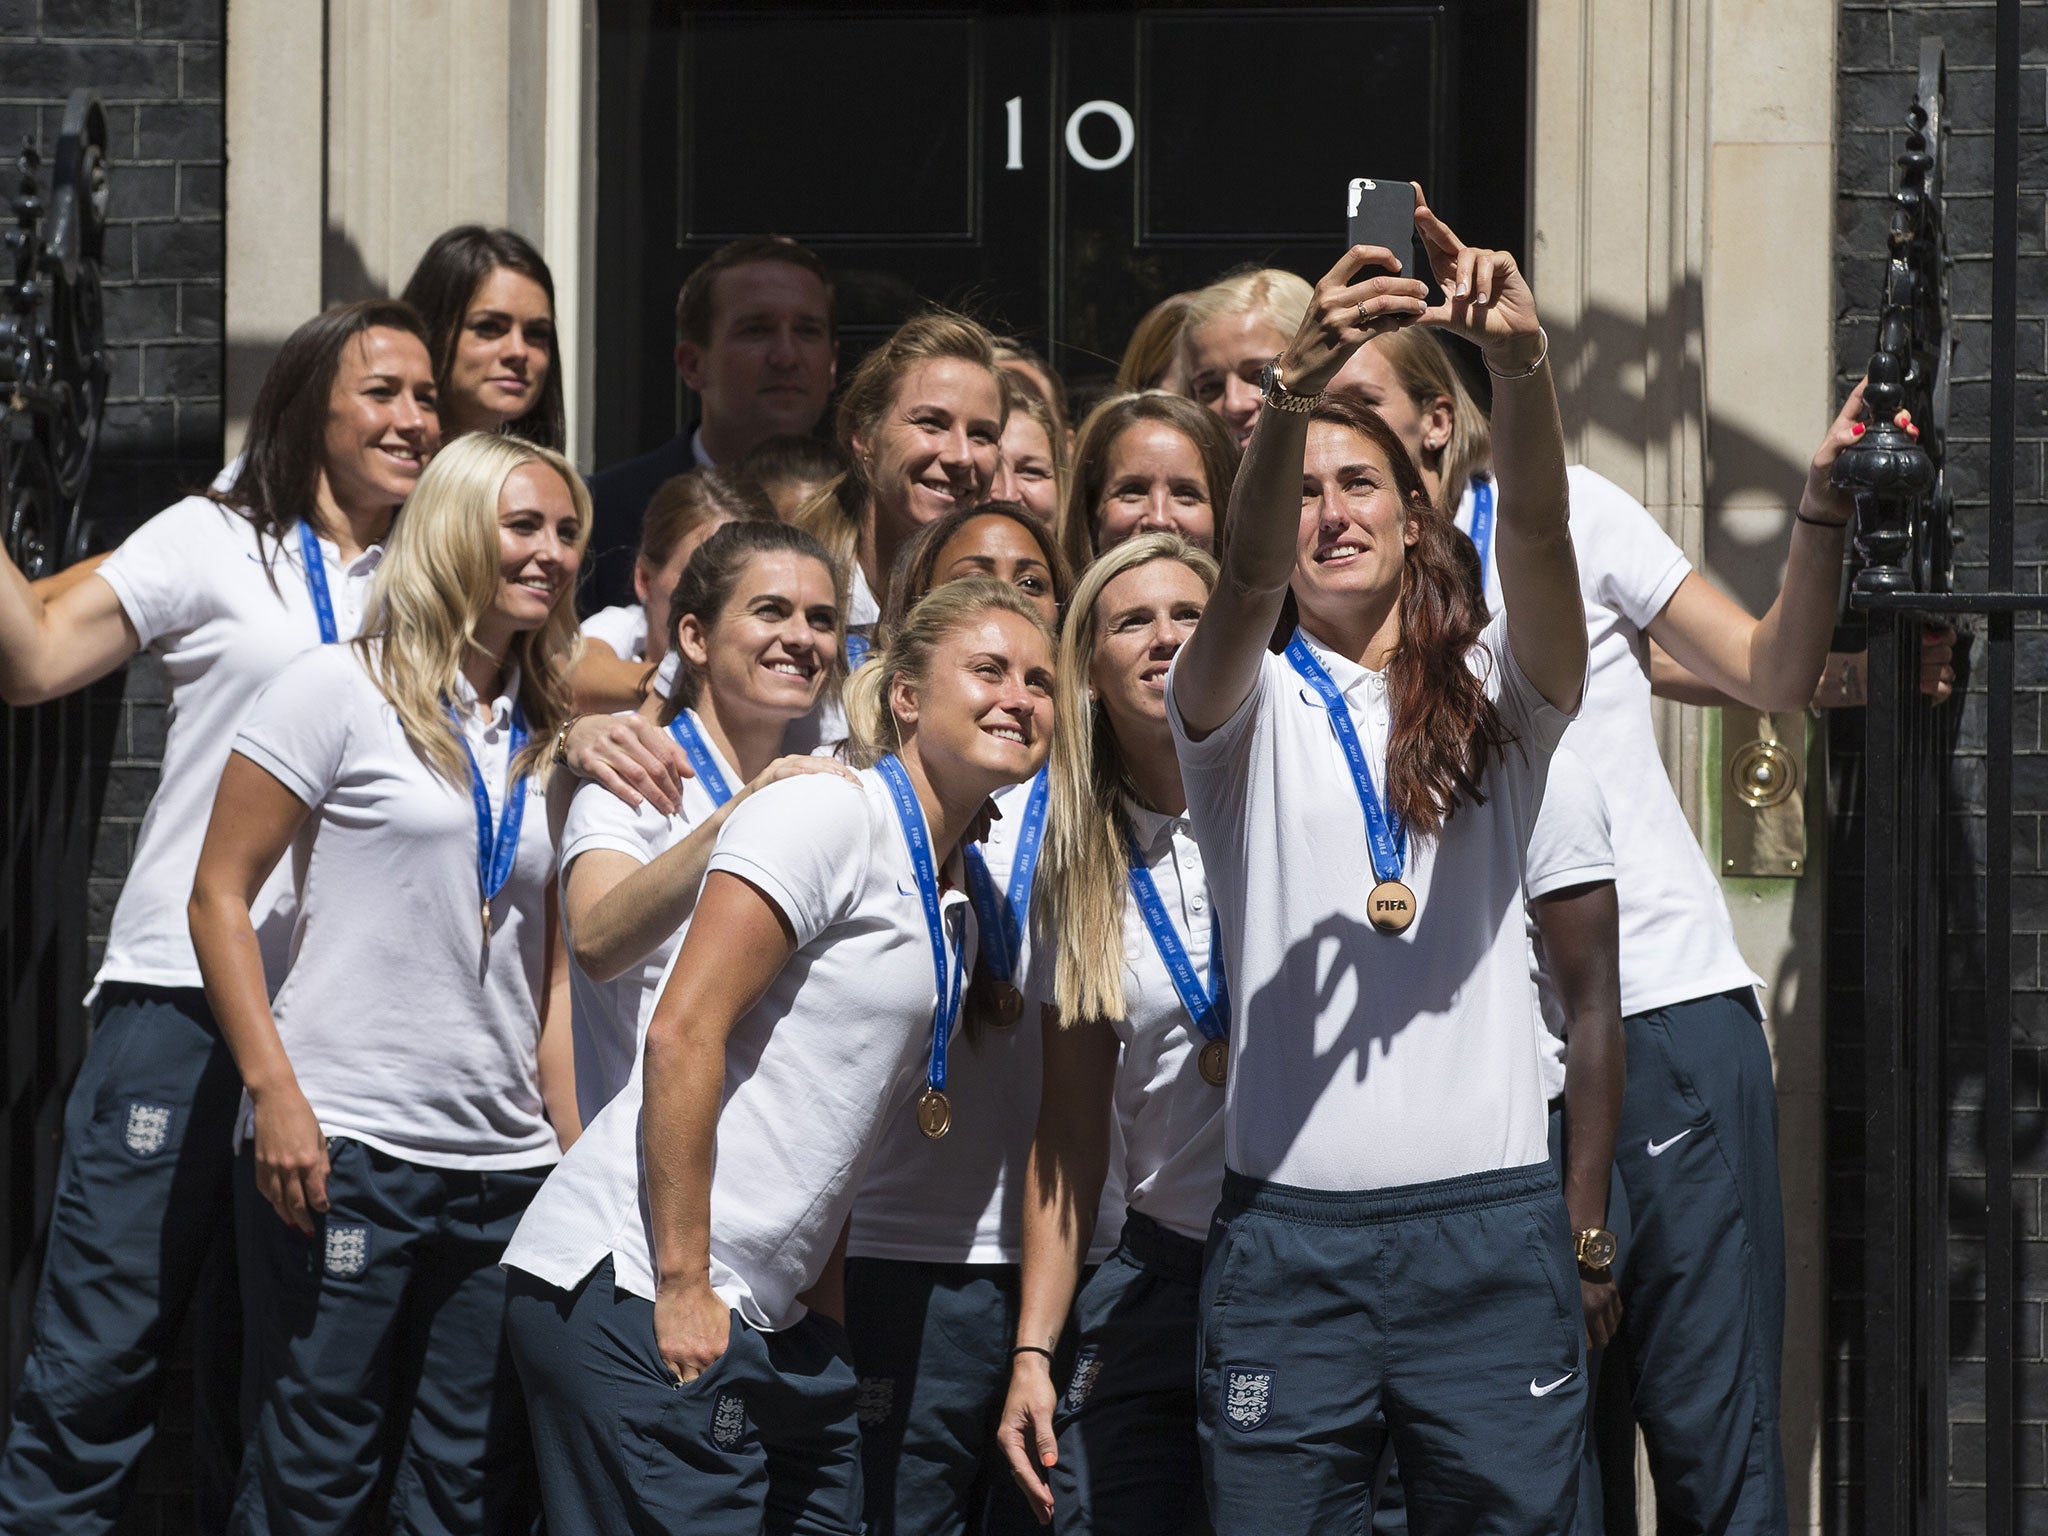 The England Women’s World Cup team pose for a selfie with David Cameron outside 10 Downing Street